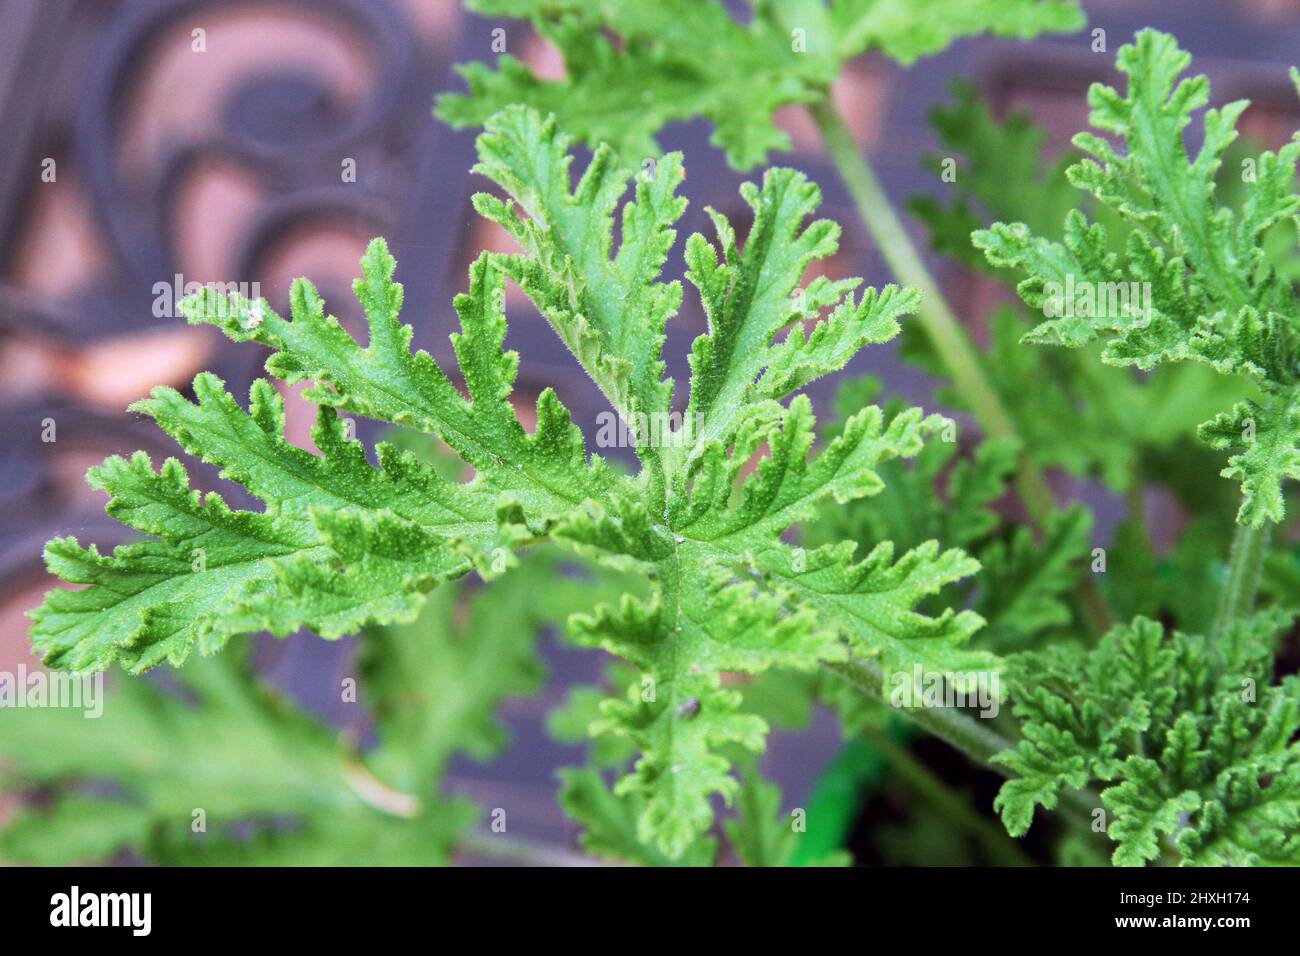 Close-up of the green leaves of a citronella plant whose fragrance is used as a natural insect repellant and in perfume. Stock Photo